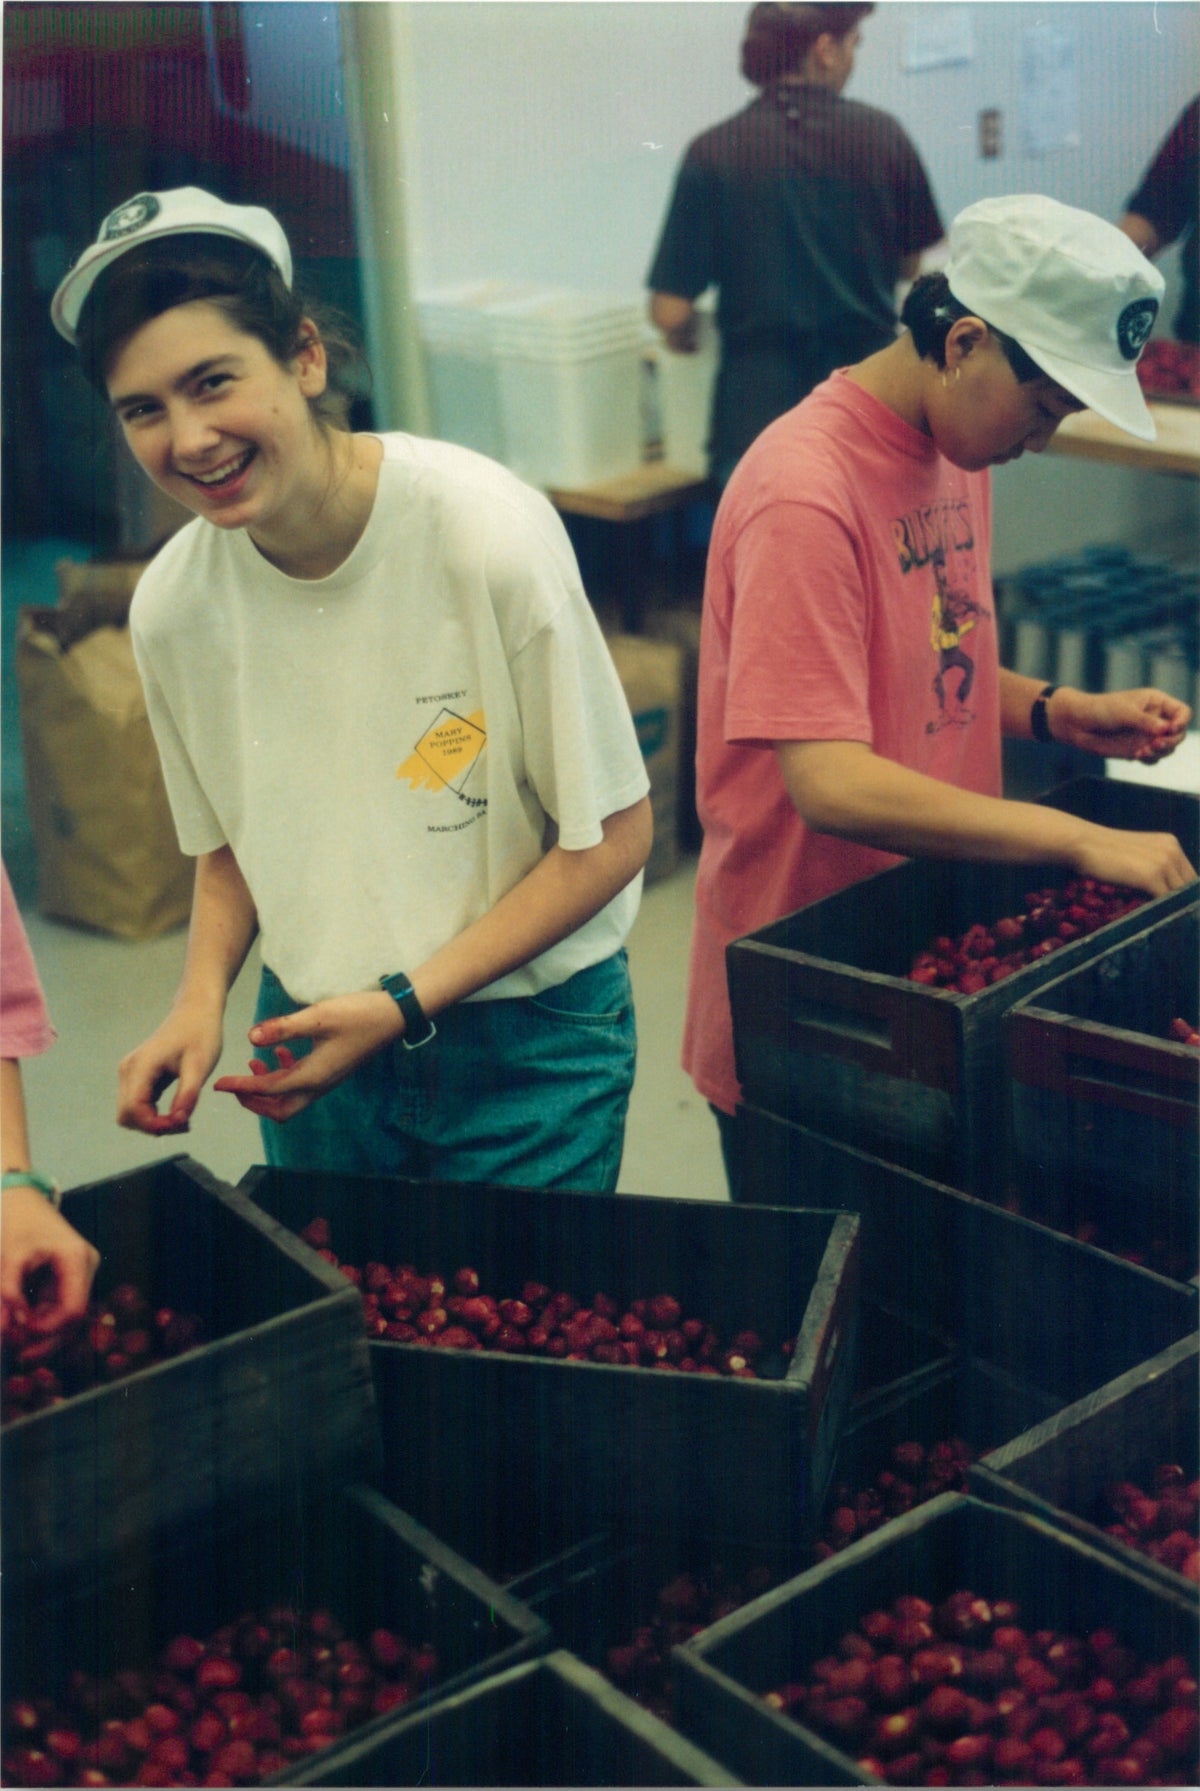 American Spoon staff processing fruit in the 1980s